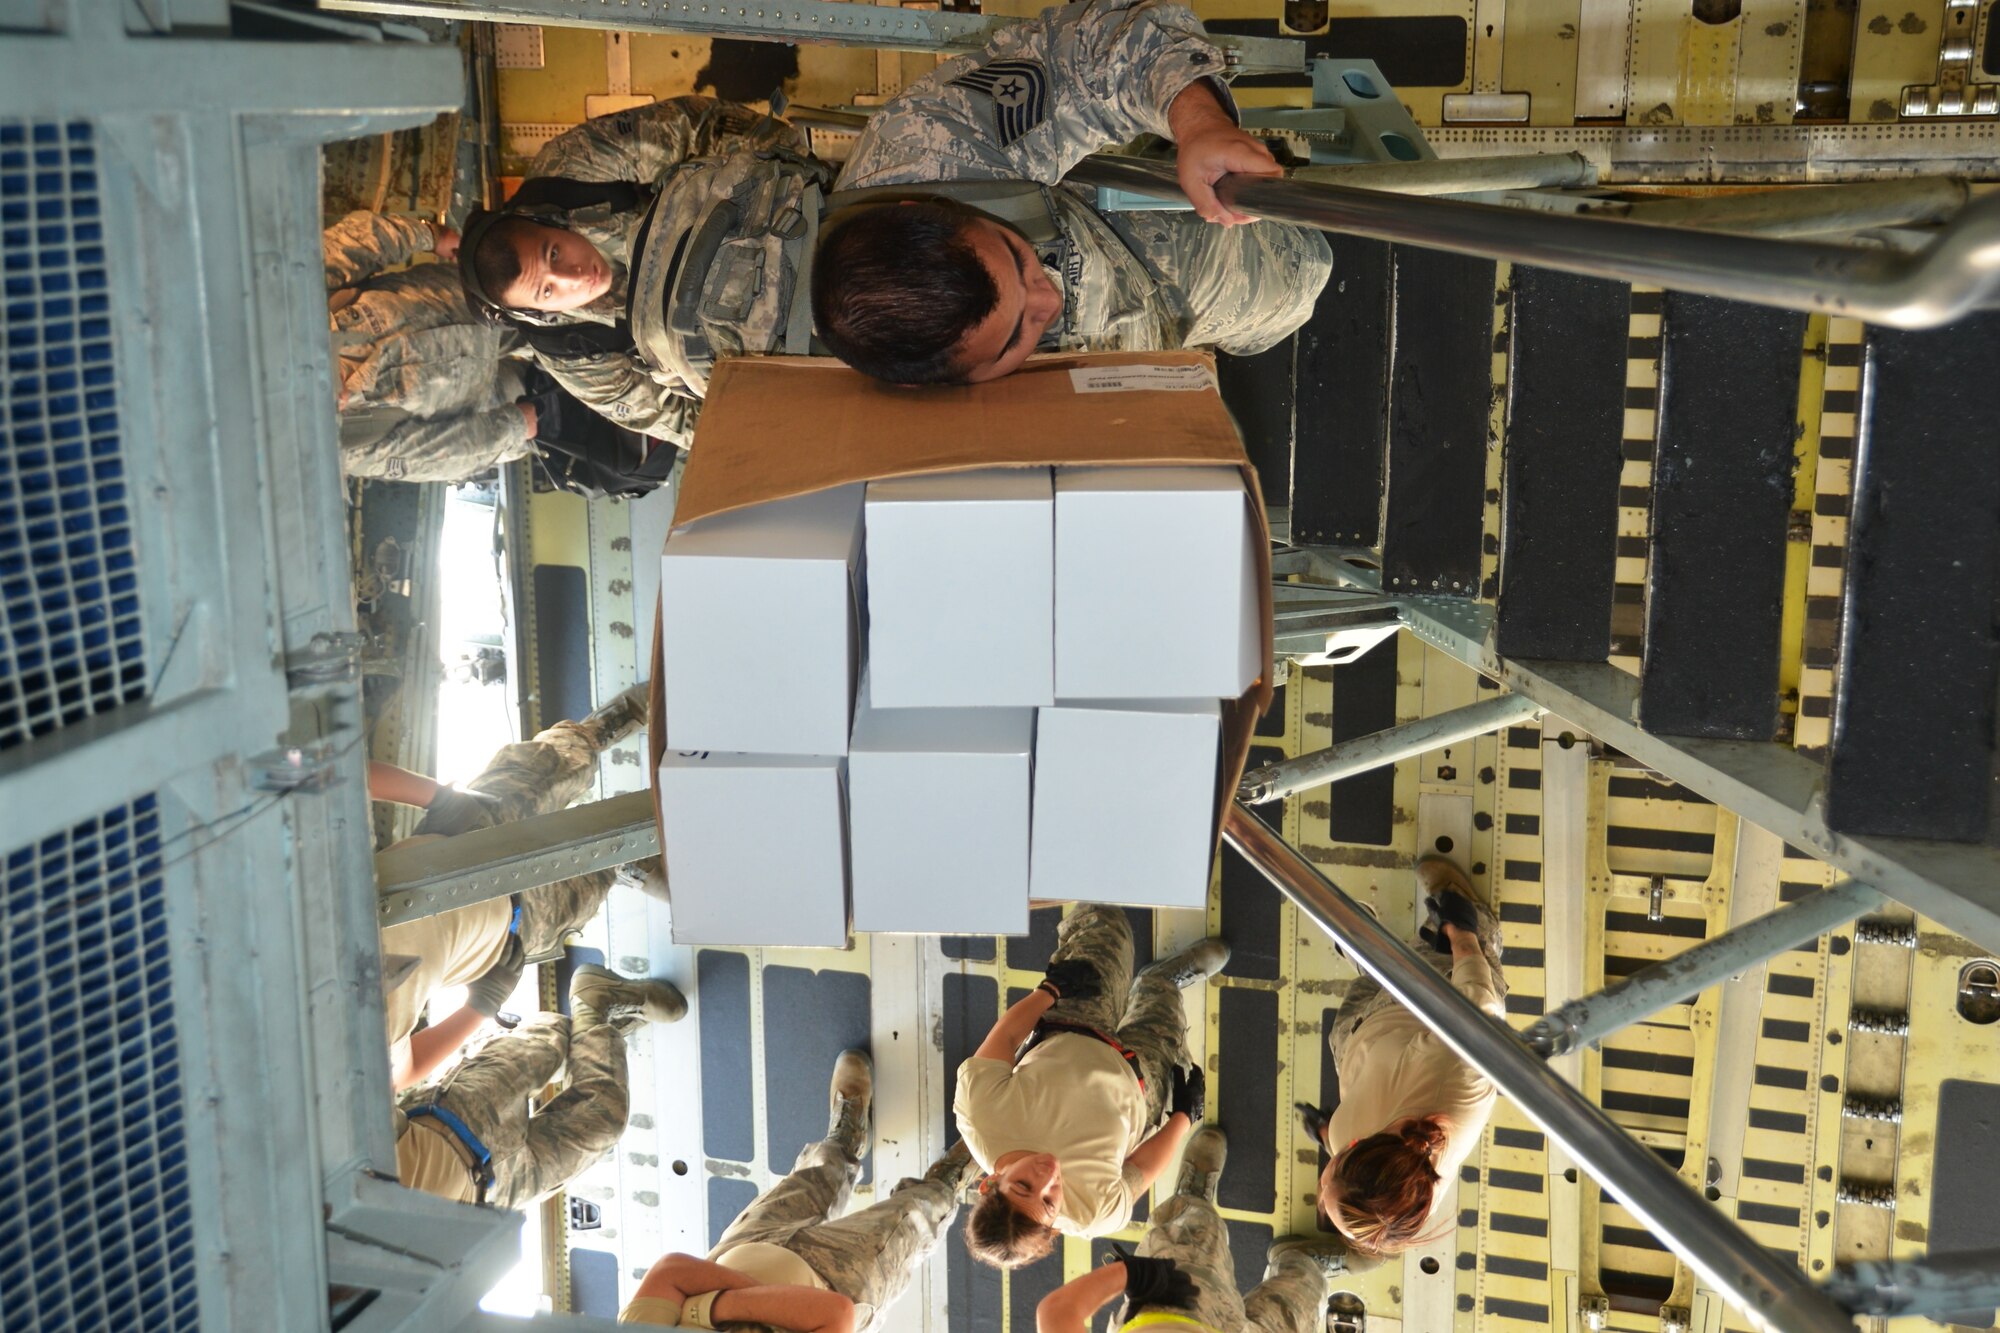 An Airman from the 433rd Airlift Control Flight carries a cardboard box of box lunches as he climbs the troop deck ladder of a C-5A Galaxy aircraft prior to taking off from Joint Base San Antonio-Lackland, Texas, 23 April, 2014 to participate in Air Force Reserve Command’s Patriot Hook Exercise at Naval Air Station, North Island, Calif. (U.S. Air Force photo/Senior Master Sgt. Minnie Jones)
